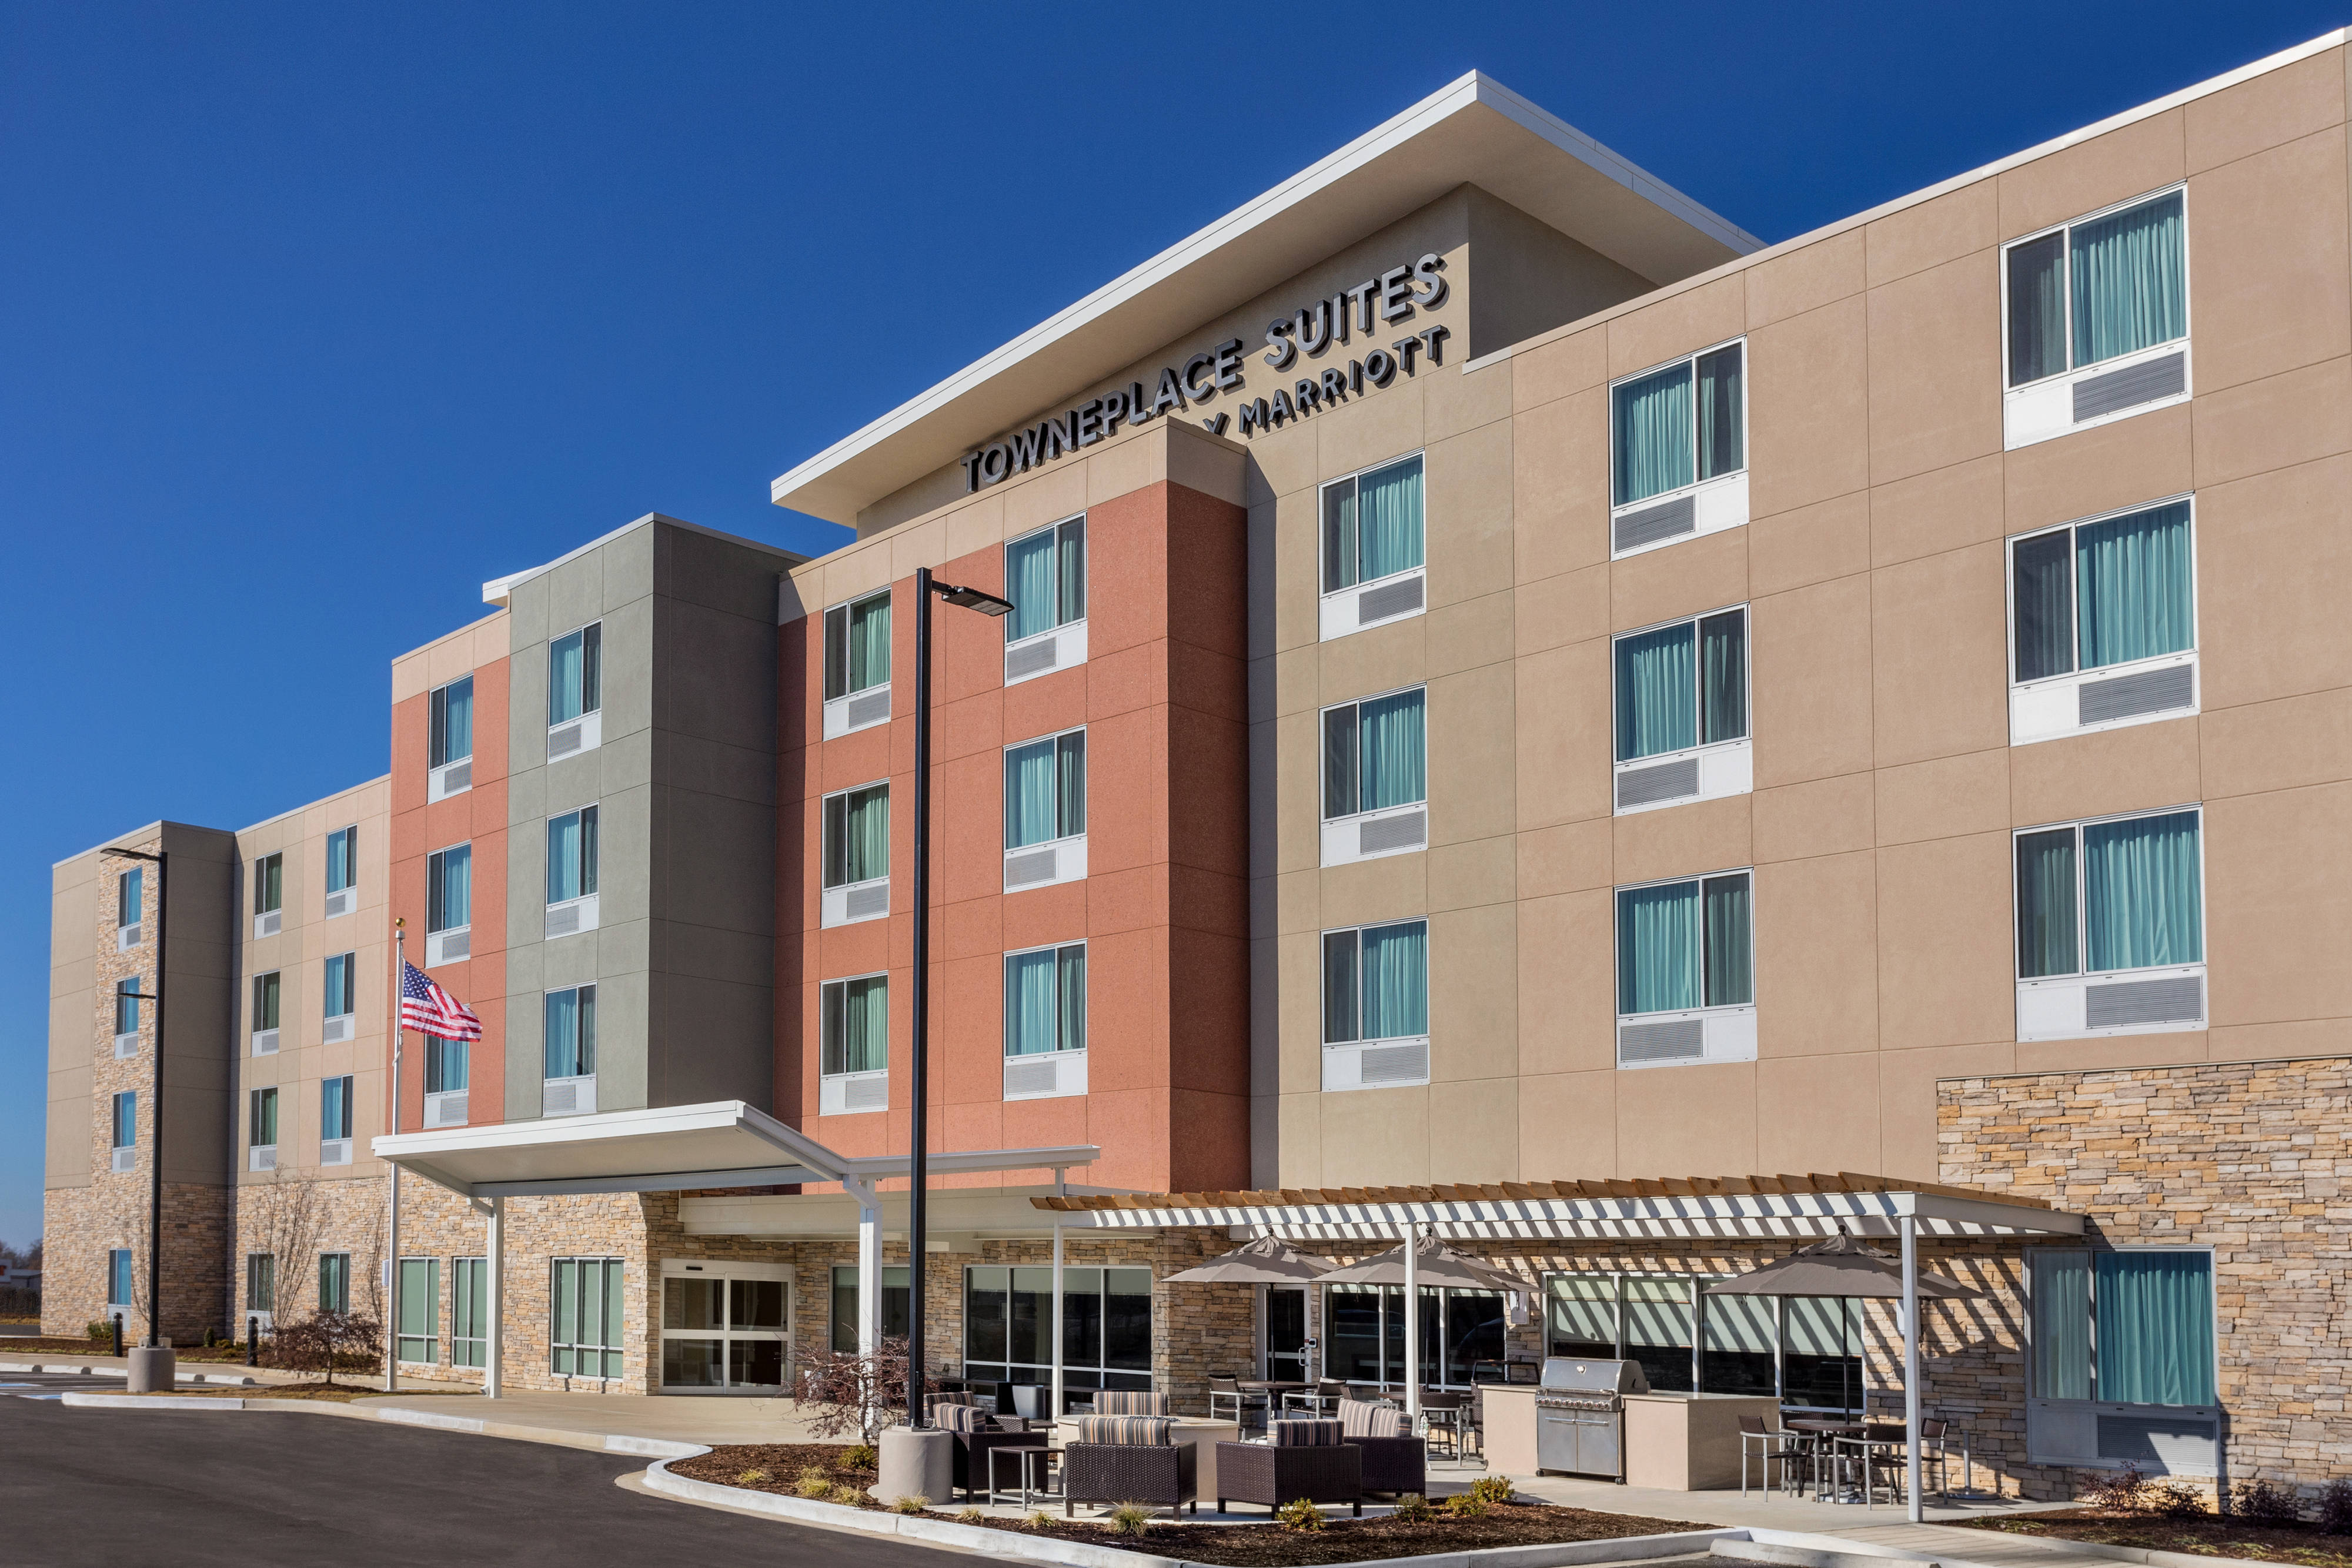 Photo of Towneplace Suites Memphis Southaven, Southaven, MS